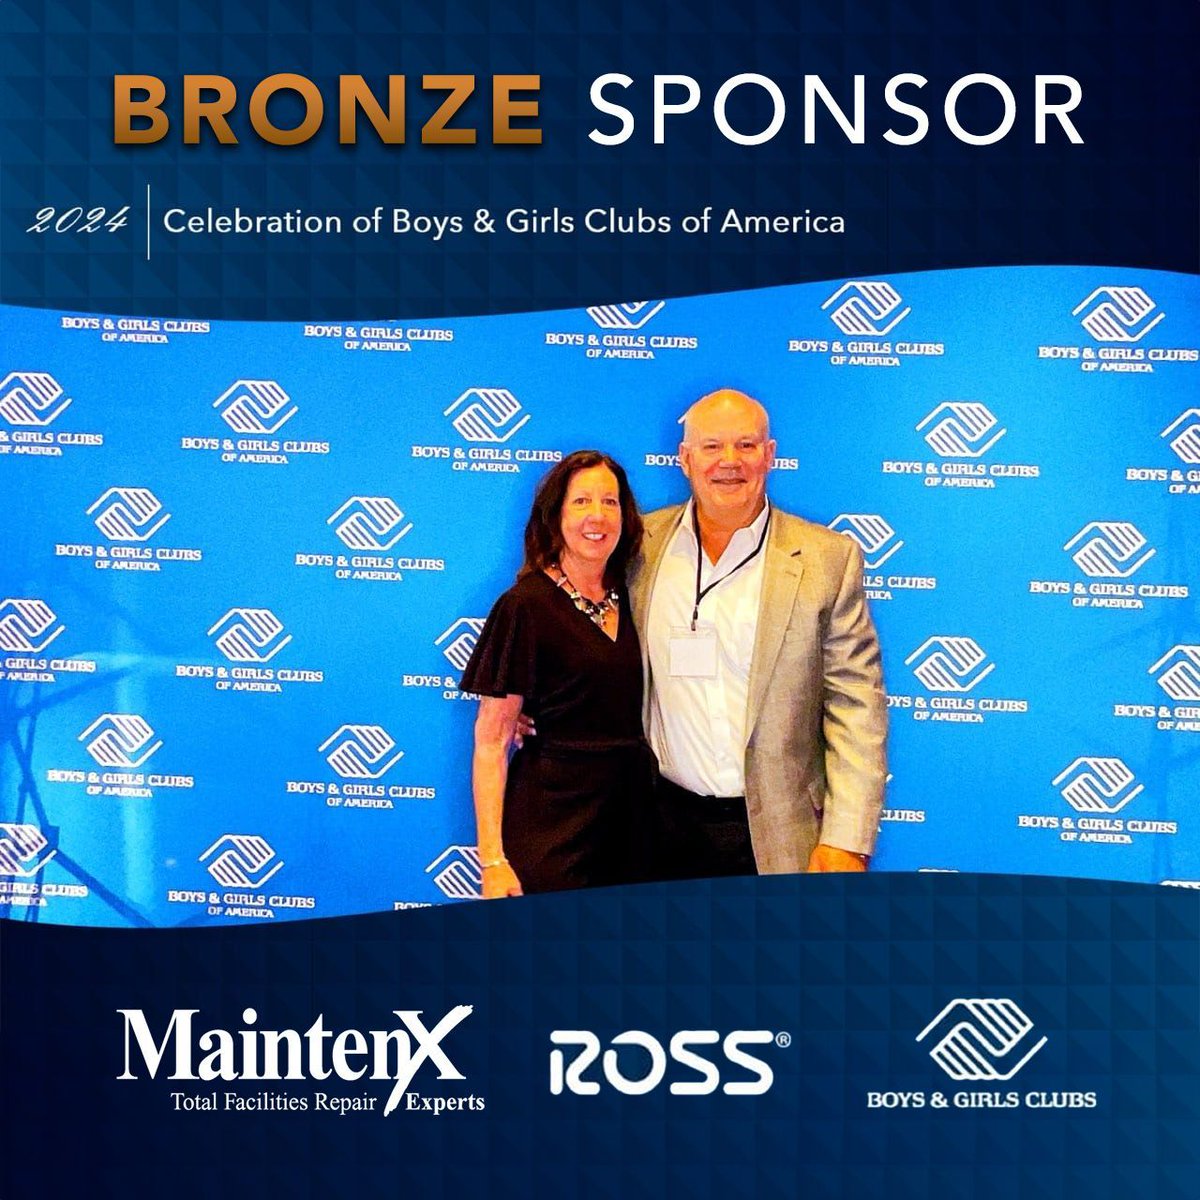 At the Boys & Girls Club Celebration in Las Vegas, #TeamMaintenX was a Bronze Sponsor! We were honored to partner with Ross Stores and help make a meaningful impact in the lives of thousands of kids and teenagers.

#BGCA #MaintenXCares #LasVegas #BoysAndGirlsClub #MaintenX